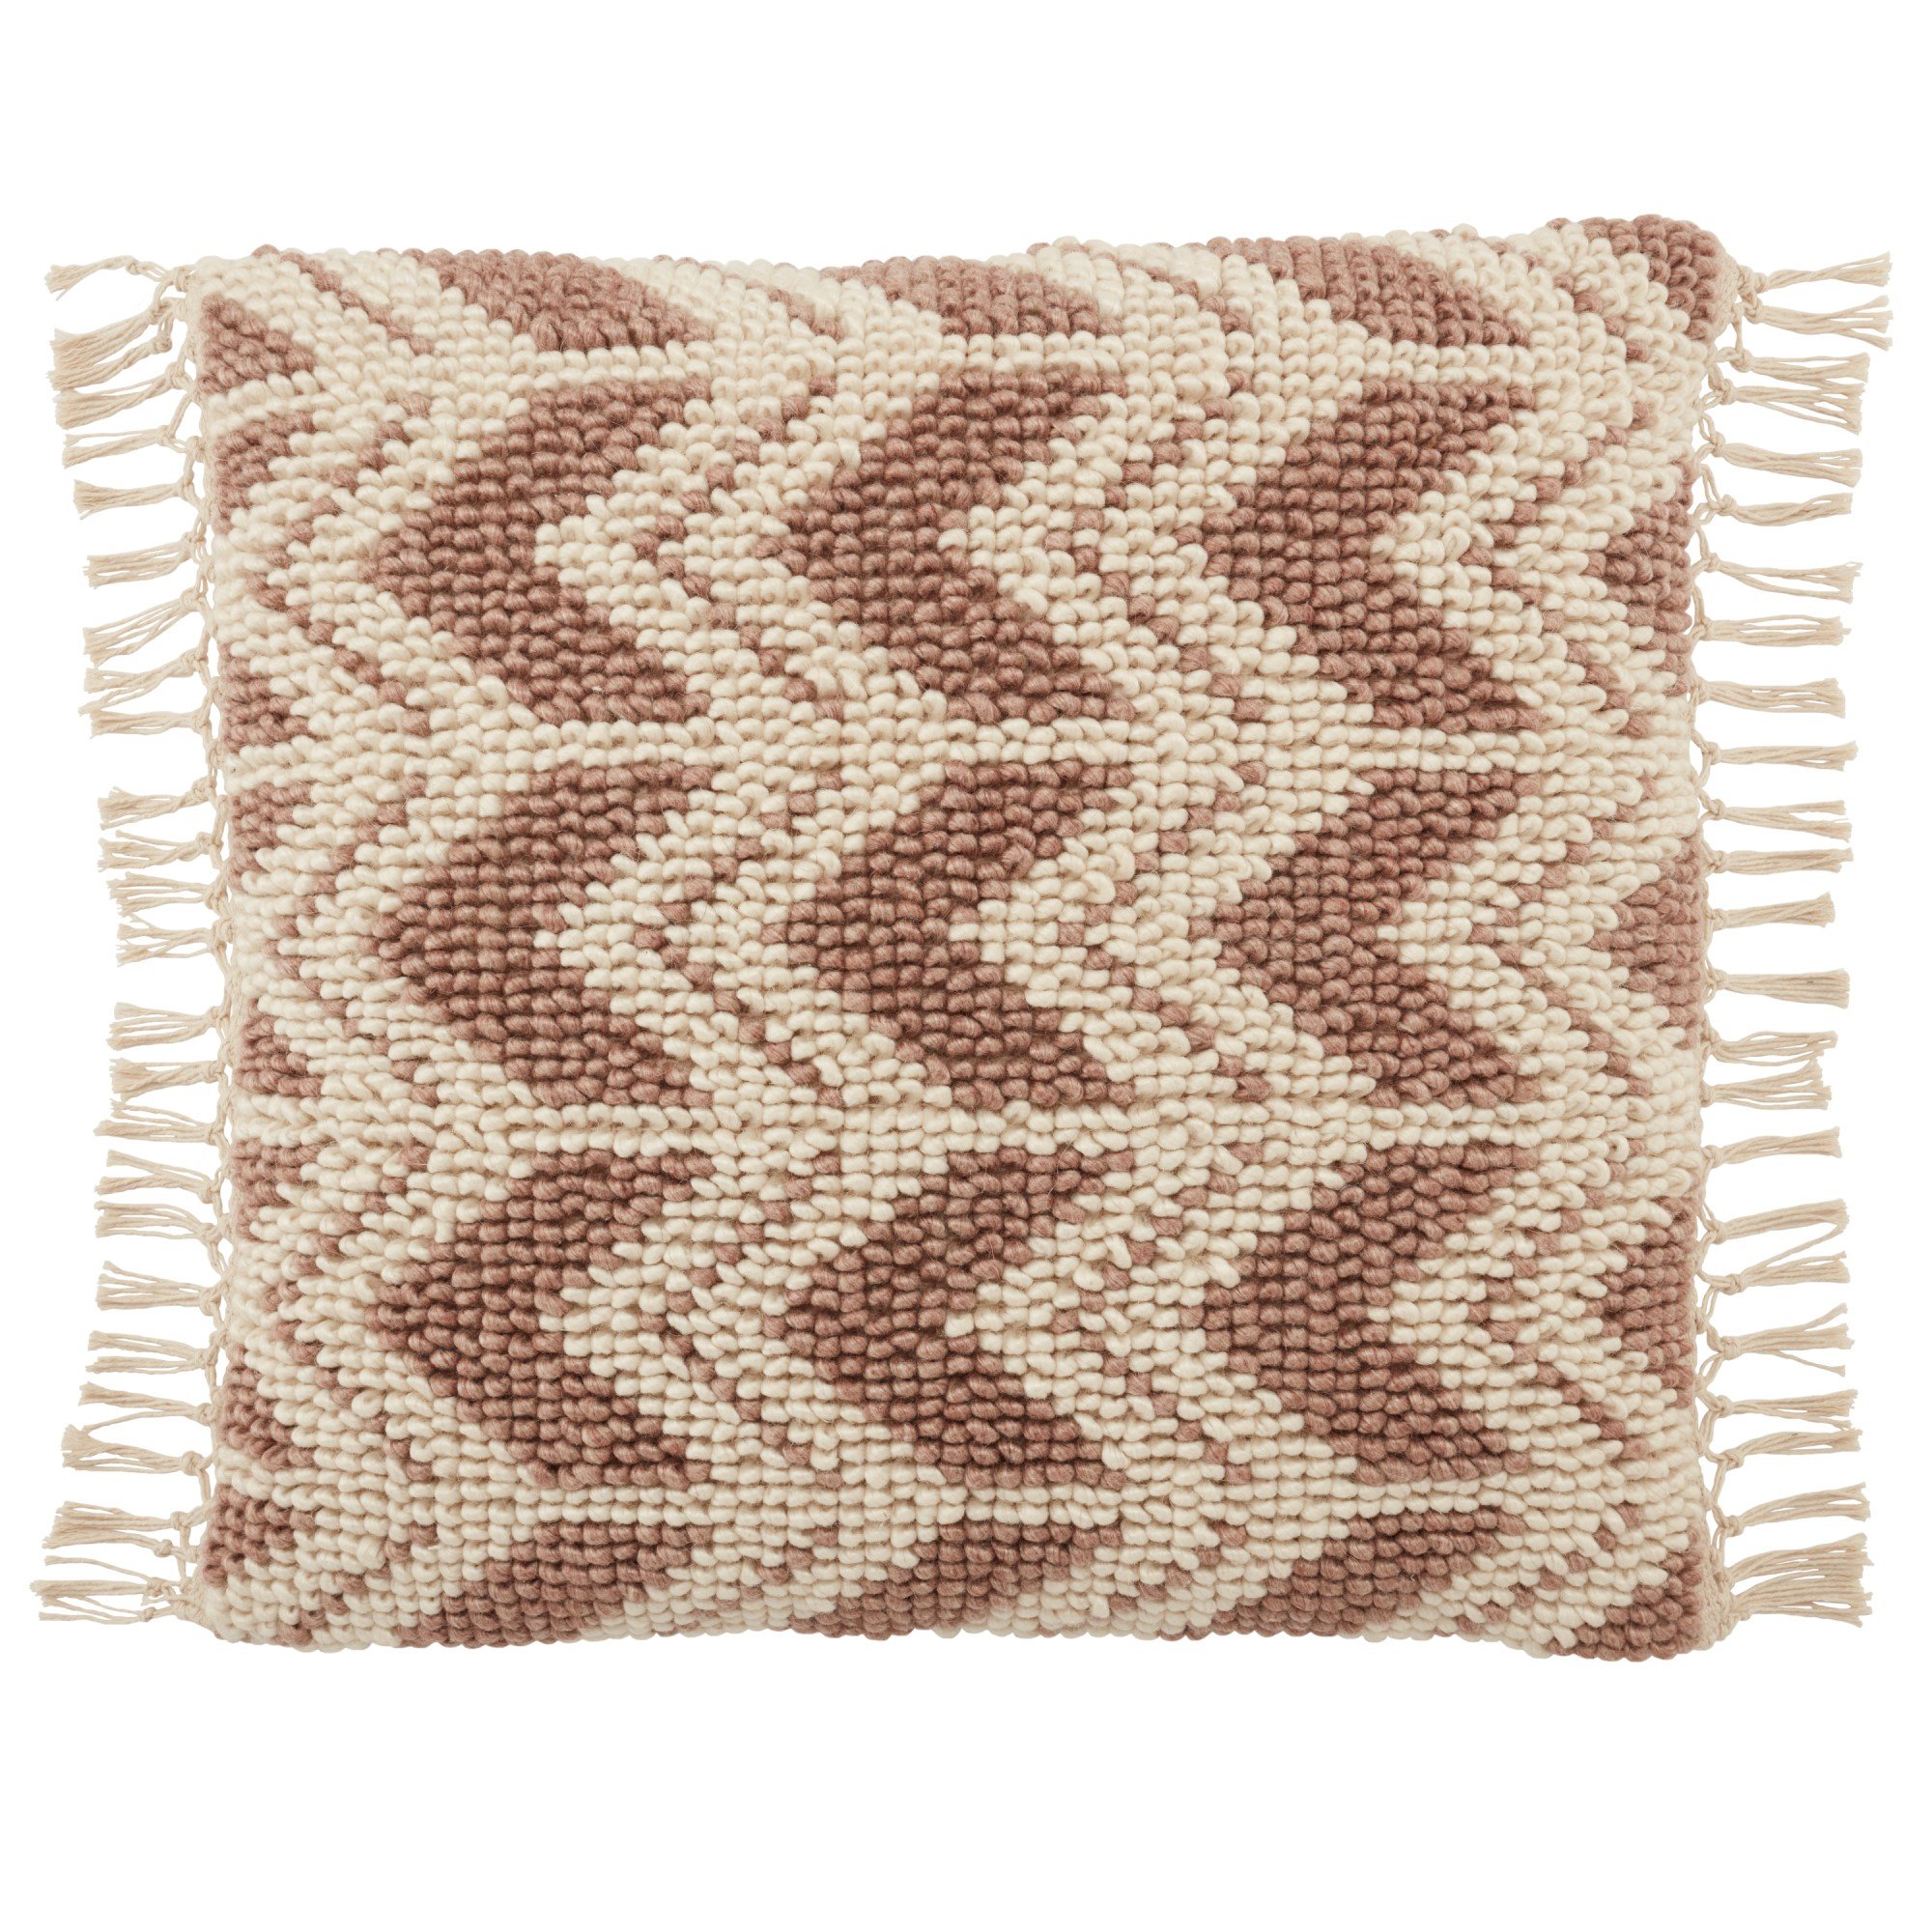 Designer Throw Pillows To Match Your, Matching Throw Pillows And Rugs